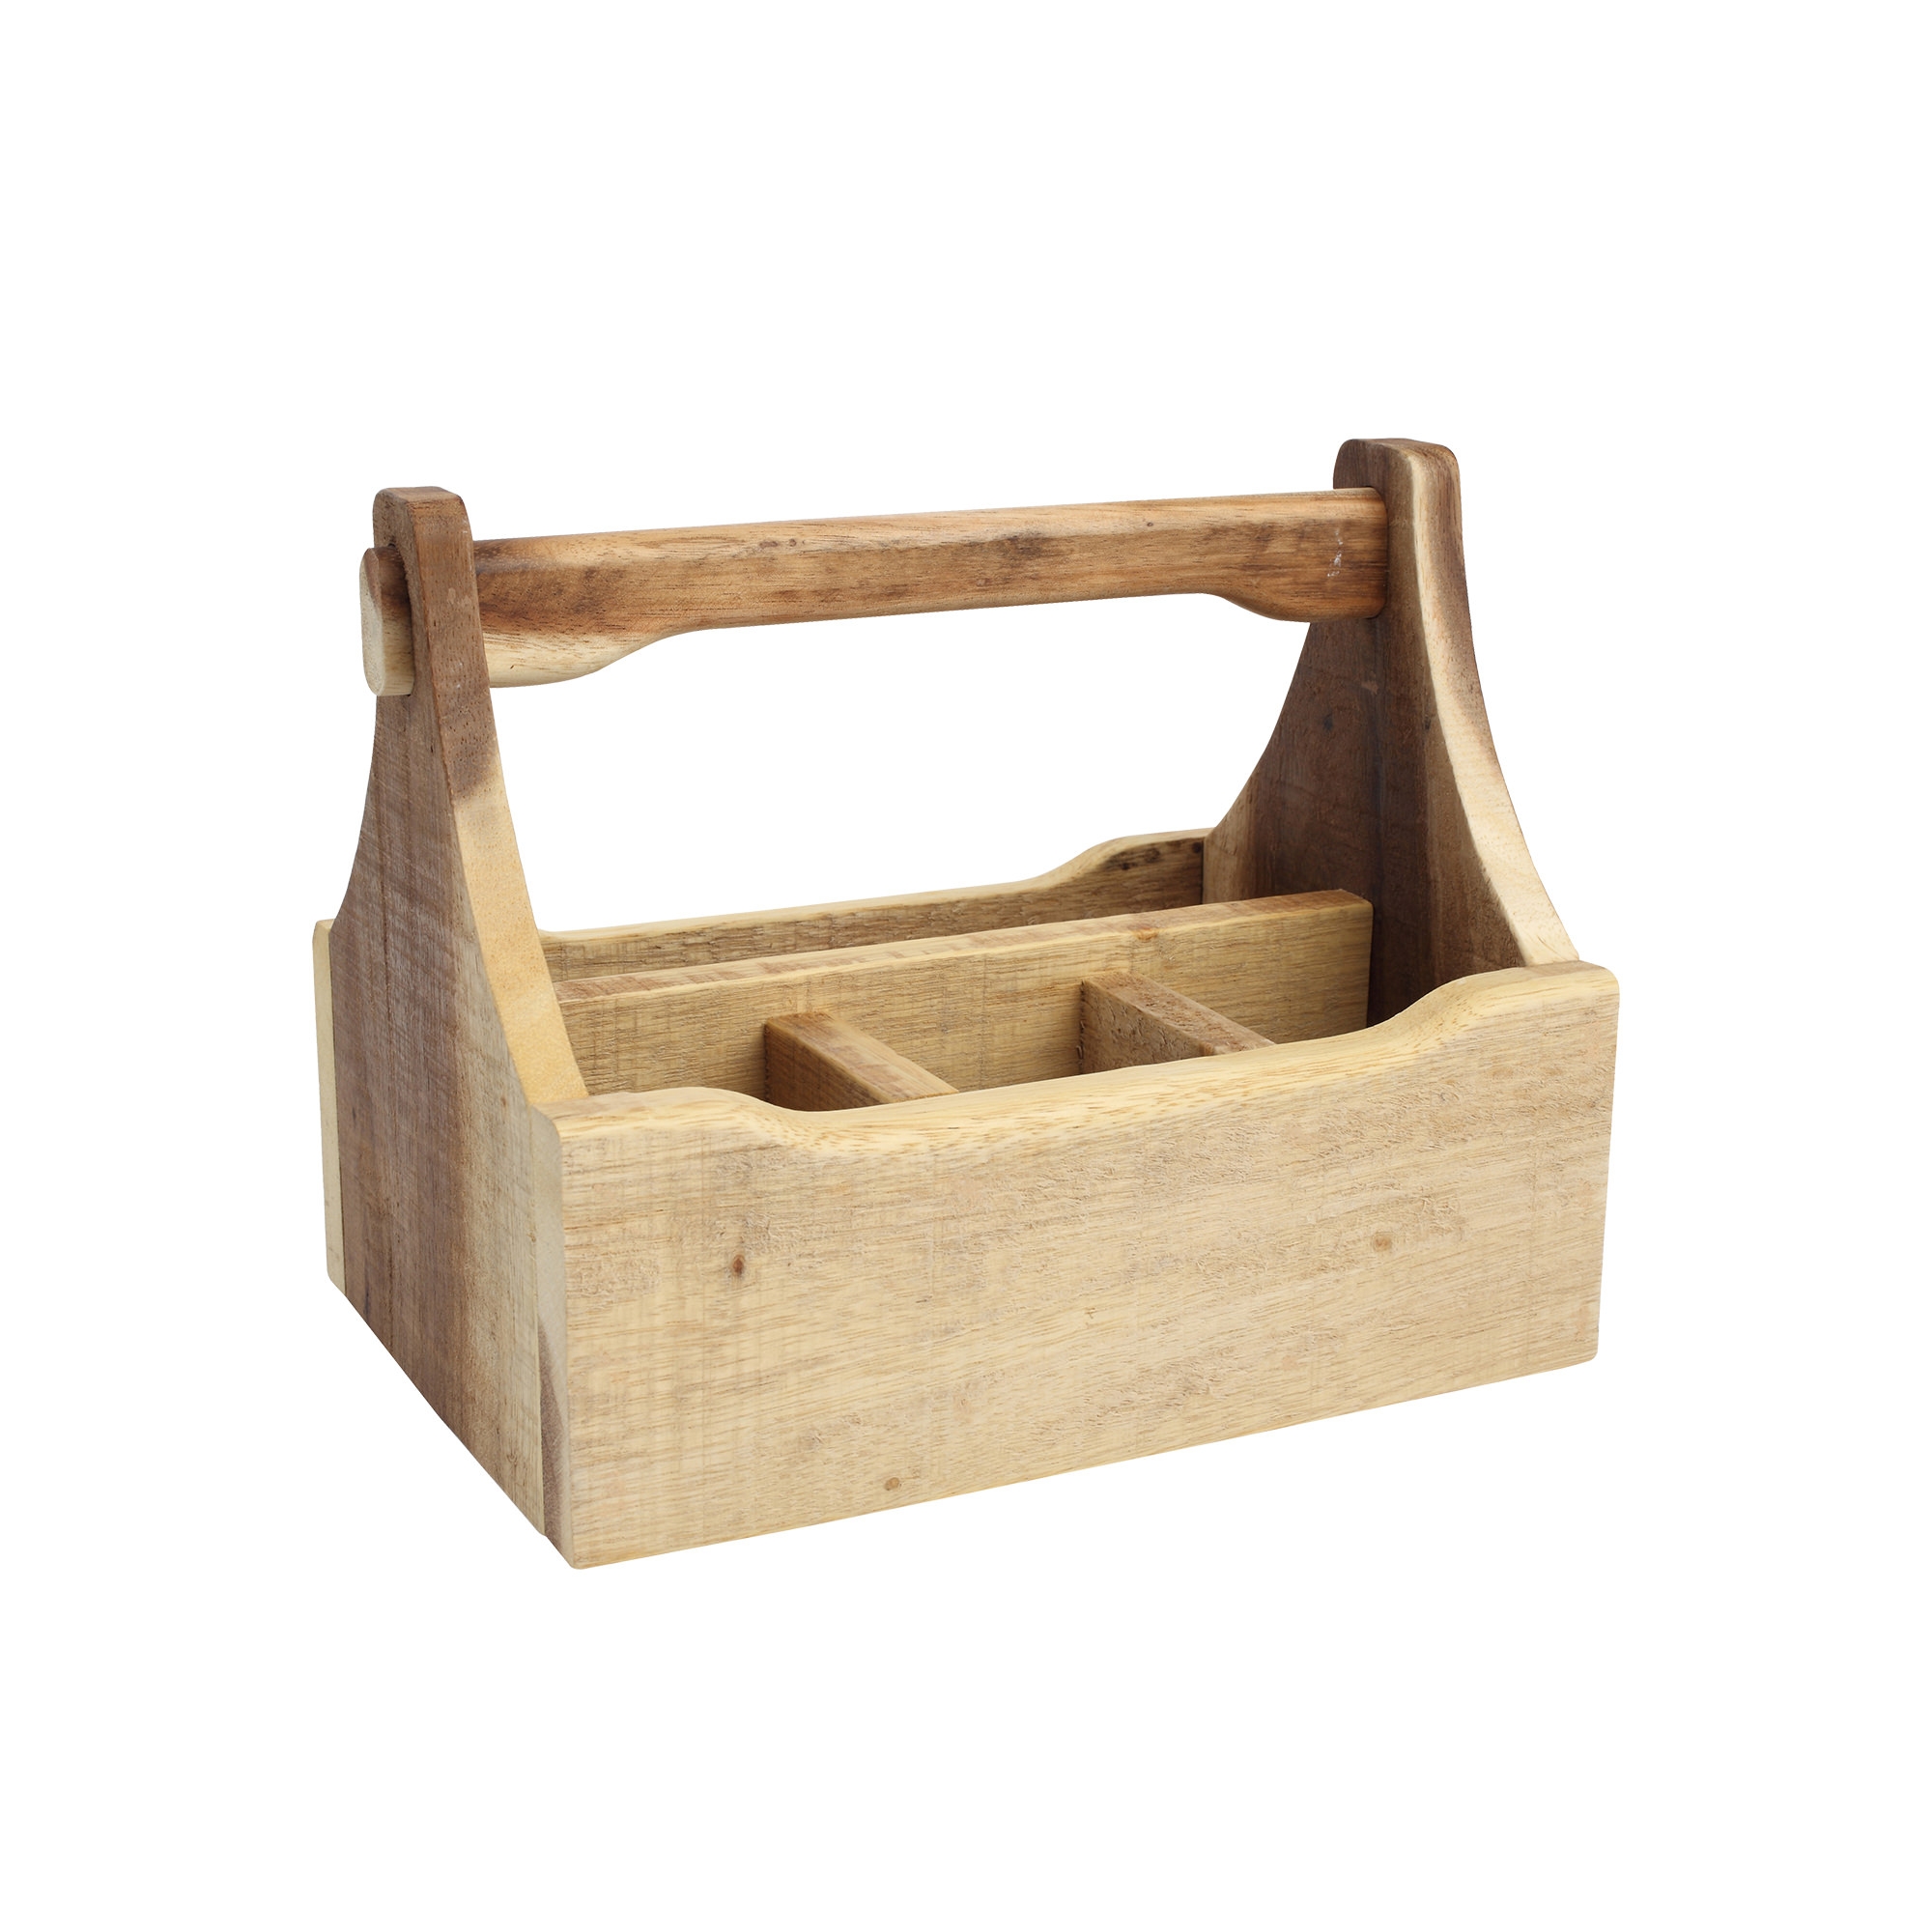 Wild Wood Rustic Table Caddy 4 Compartment Image 1